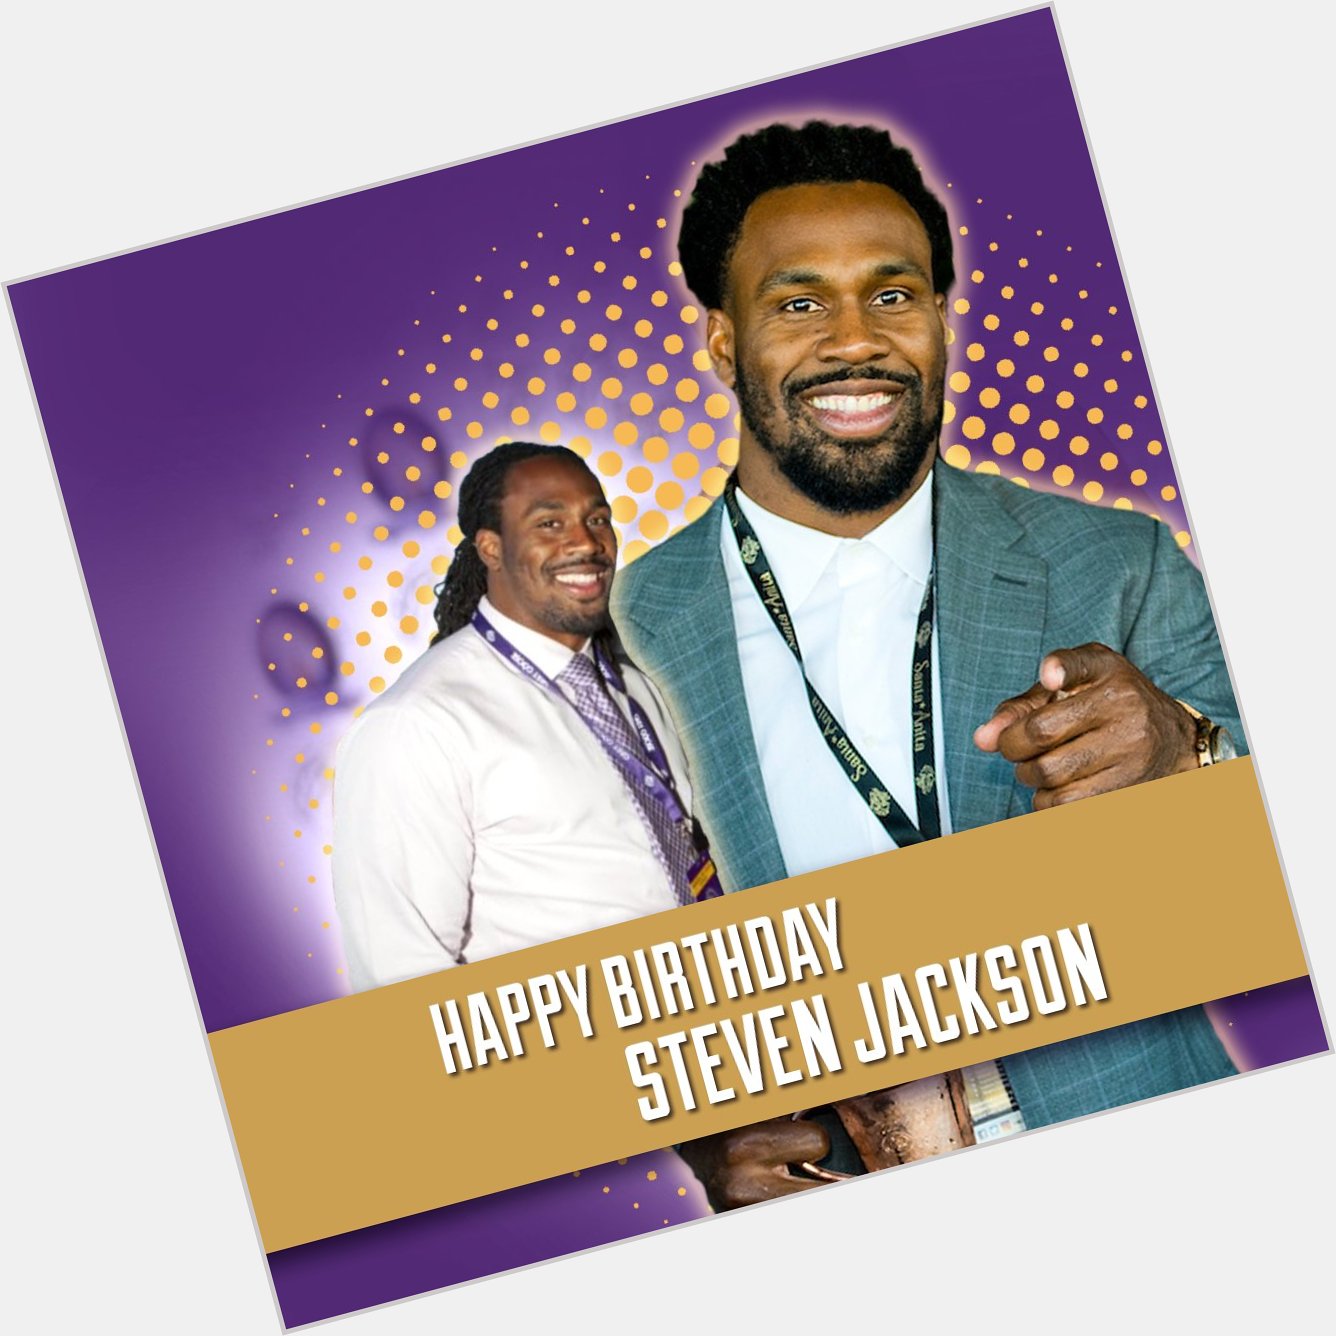 Happy Birthday, Steven Jackson ( We hope you have a great day!     